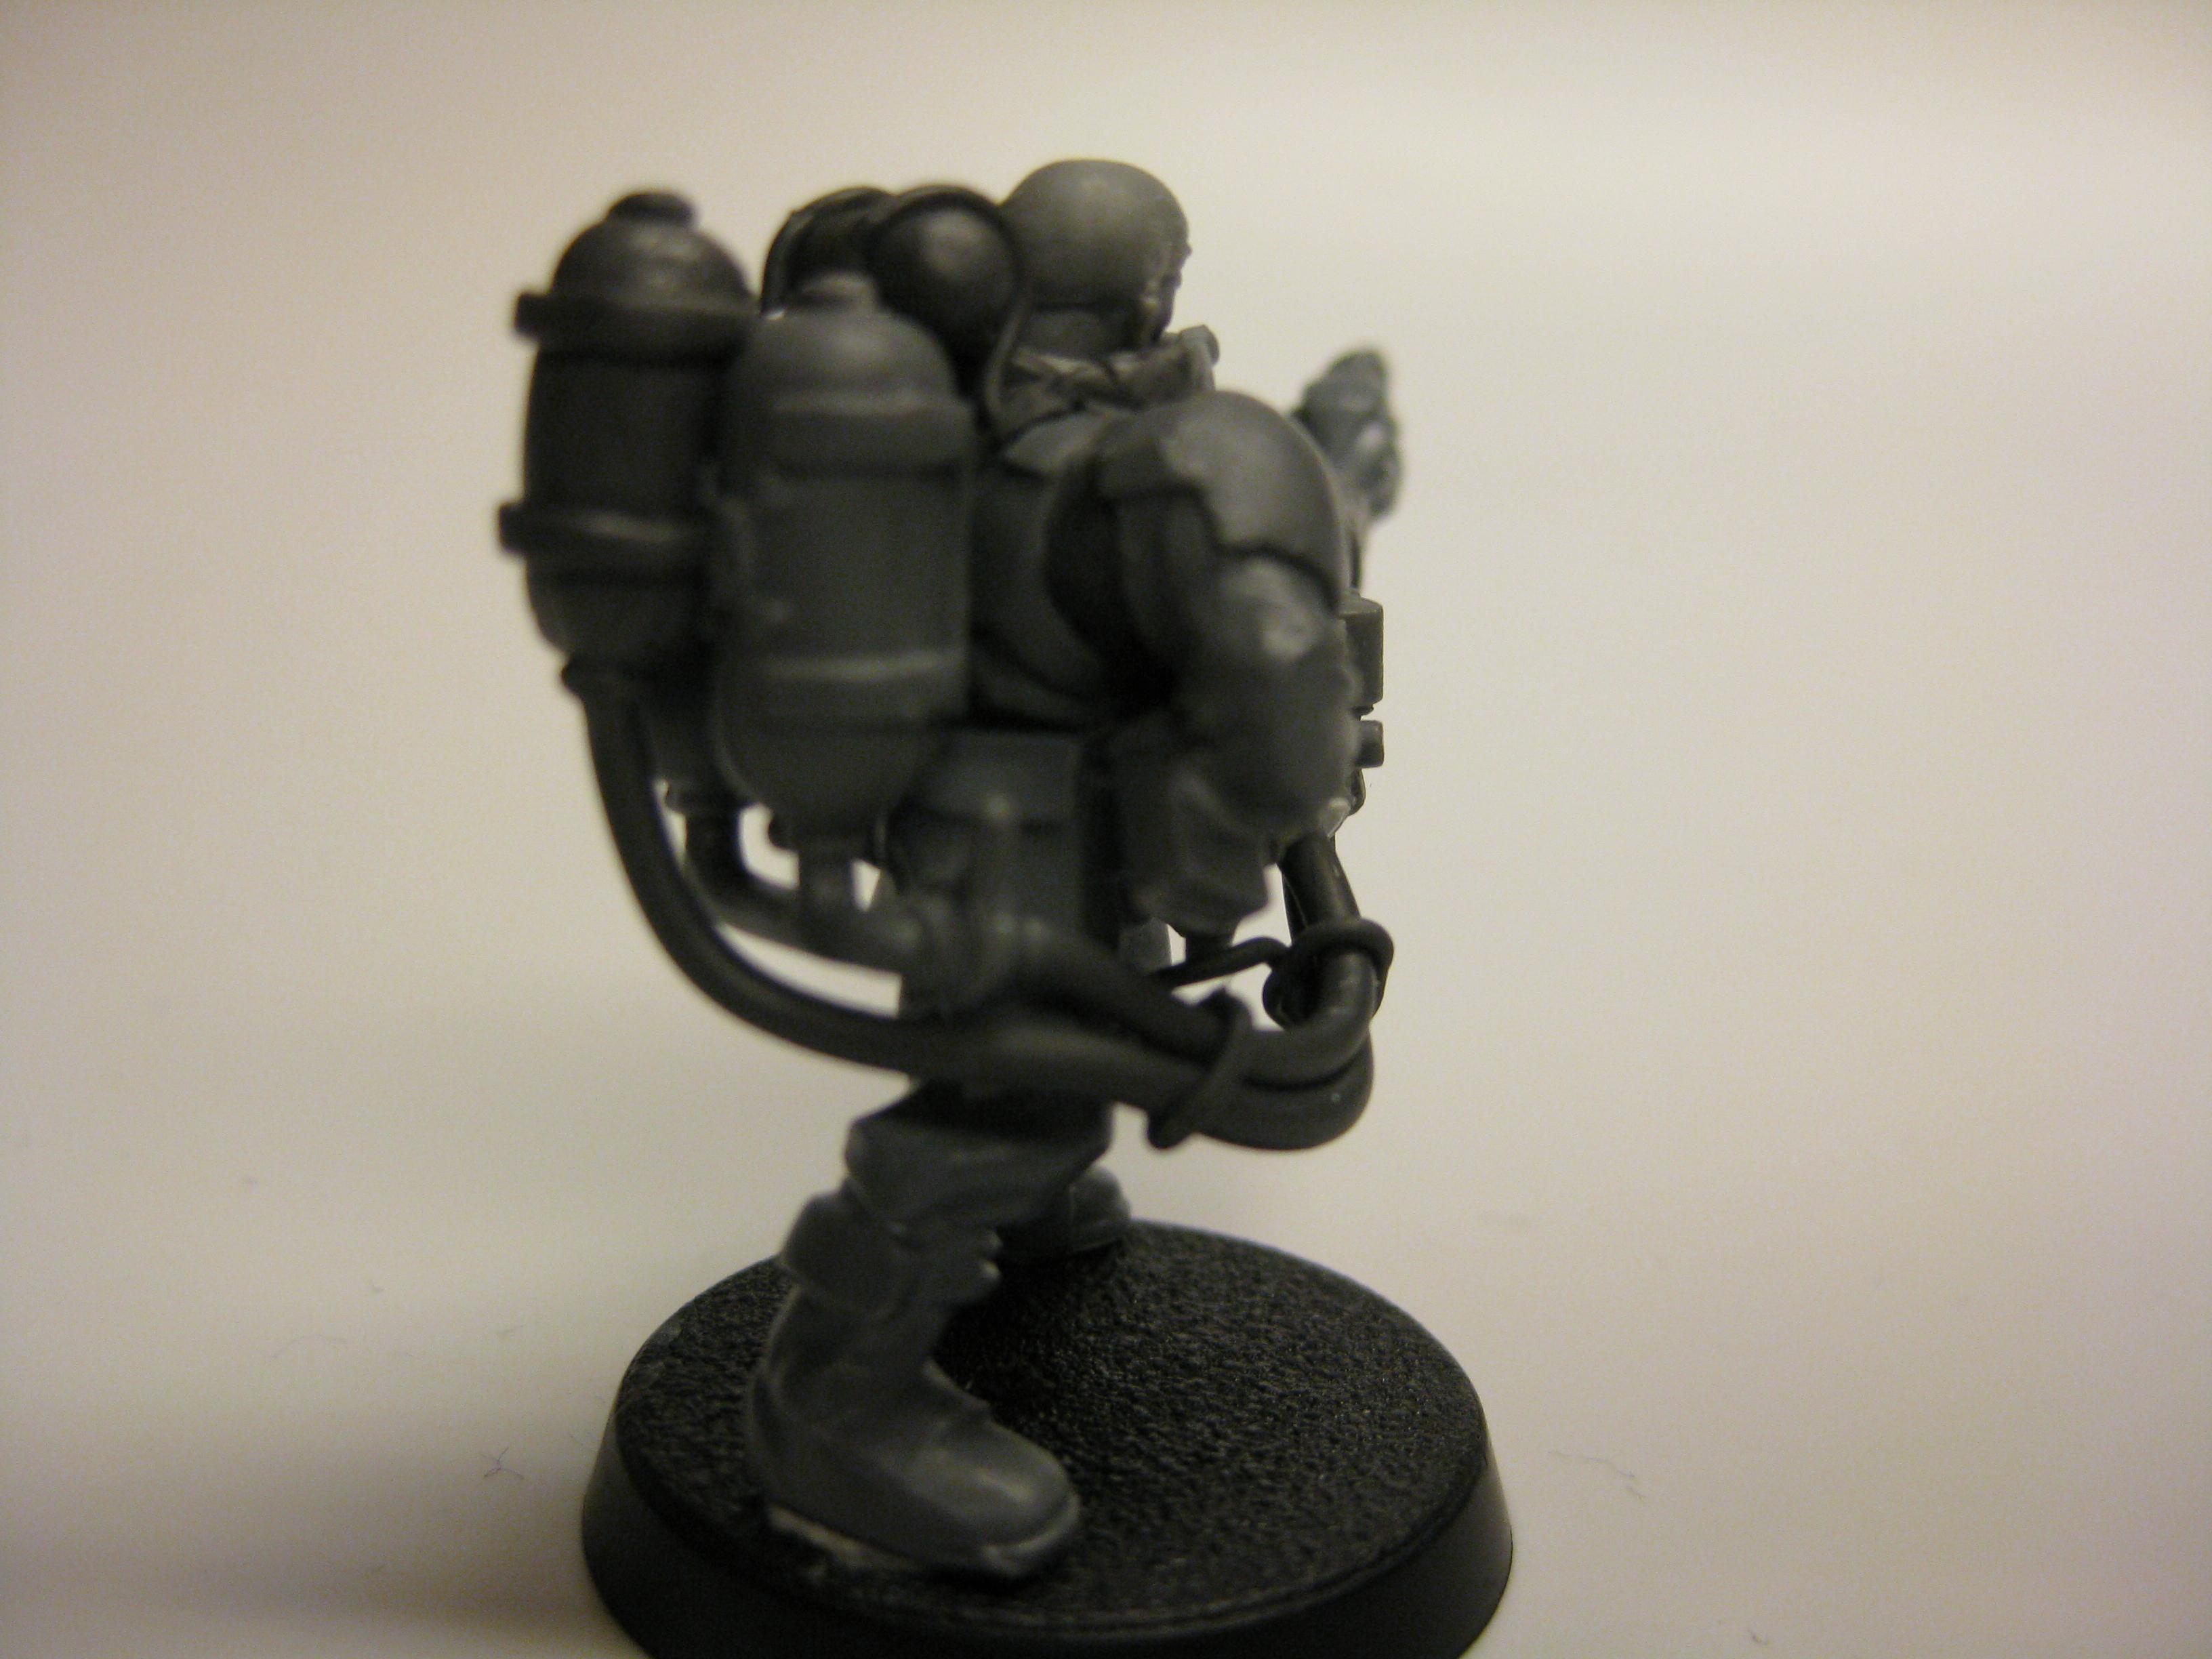 Rear shot of the flamer guy. He has an extra tank as well